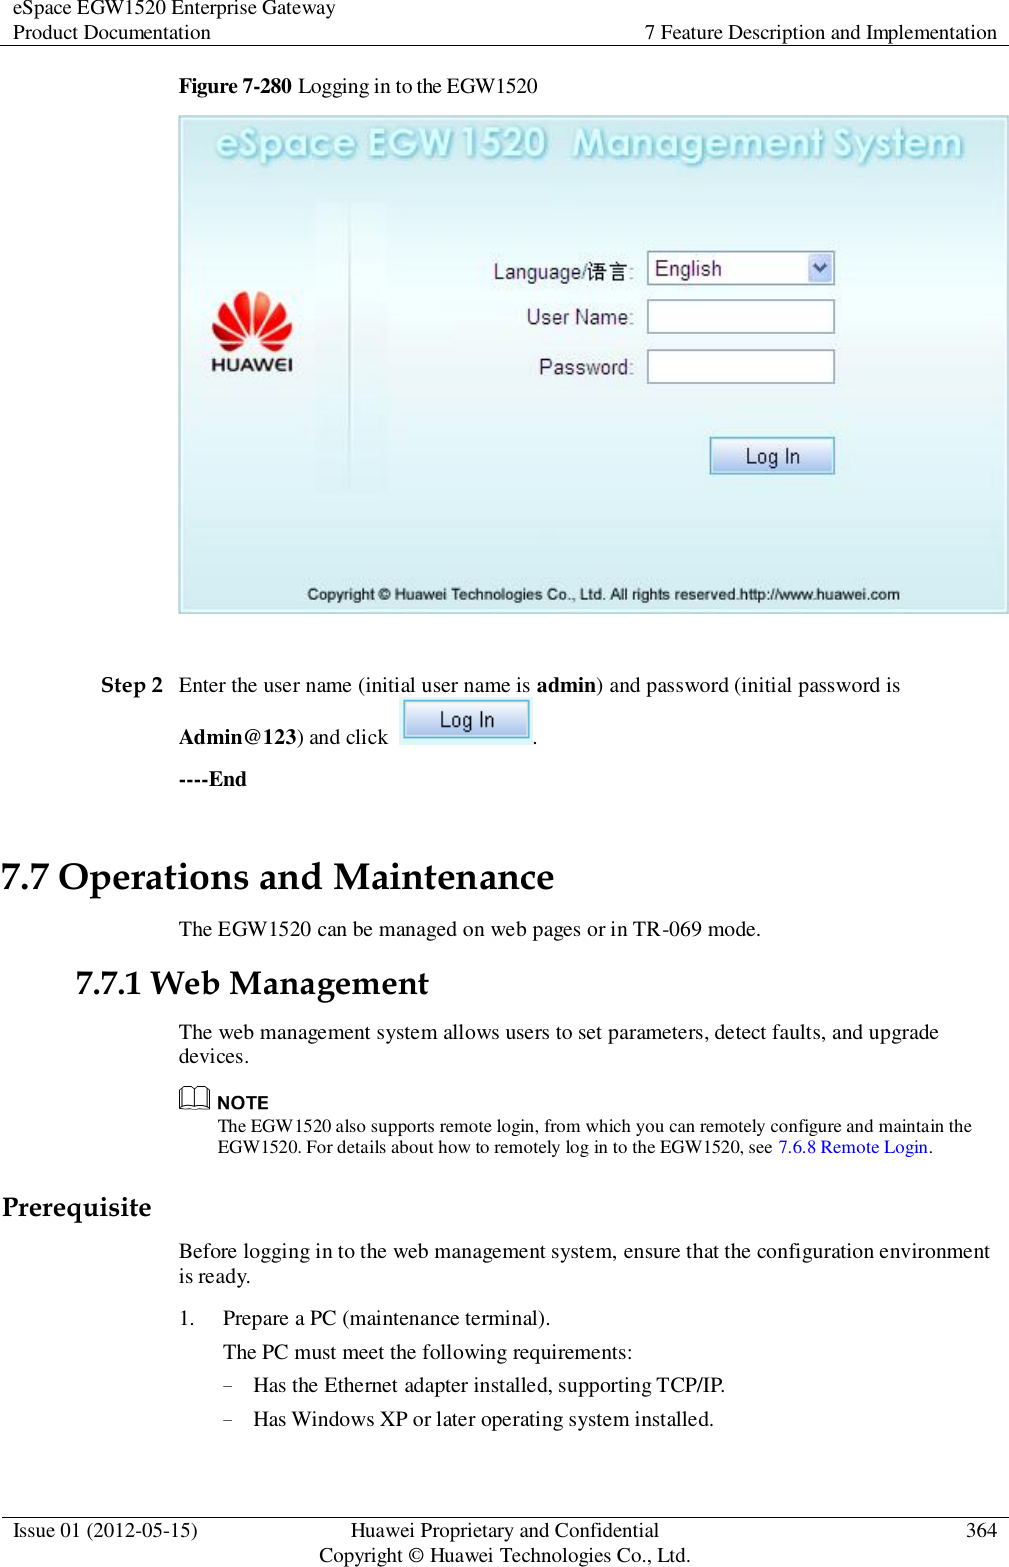 eSpace EGW1520 Enterprise Gateway Product Documentation 7 Feature Description and Implementation  Issue 01 (2012-05-15) Huawei Proprietary and Confidential                                     Copyright © Huawei Technologies Co., Ltd. 364  Figure 7-280 Logging in to the EGW1520   Step 2 Enter the user name (initial user name is admin) and password (initial password is Admin@123) and click  . ----End 7.7 Operations and Maintenance The EGW1520 can be managed on web pages or in TR-069 mode. 7.7.1 Web Management The web management system allows users to set parameters, detect faults, and upgrade devices.  The EGW1520 also supports remote login, from which you can remotely configure and maintain the EGW1520. For details about how to remotely log in to the EGW1520, see 7.6.8 Remote Login. Prerequisite Before logging in to the web management system, ensure that the configuration environment is ready. 1. Prepare a PC (maintenance terminal). The PC must meet the following requirements: − Has the Ethernet adapter installed, supporting TCP/IP. − Has Windows XP or later operating system installed. 